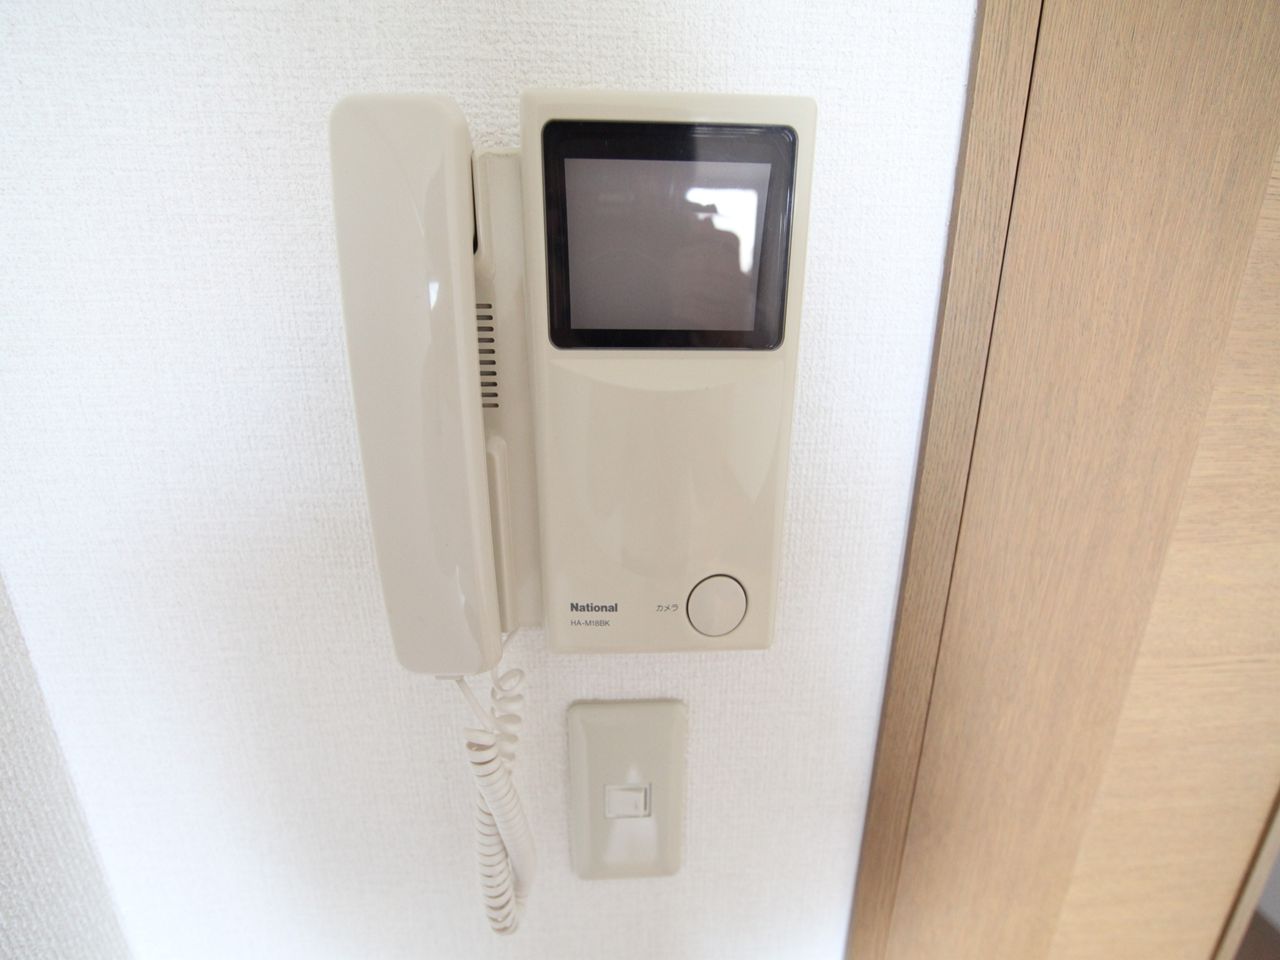 Security. Security Intercom with TV monitor